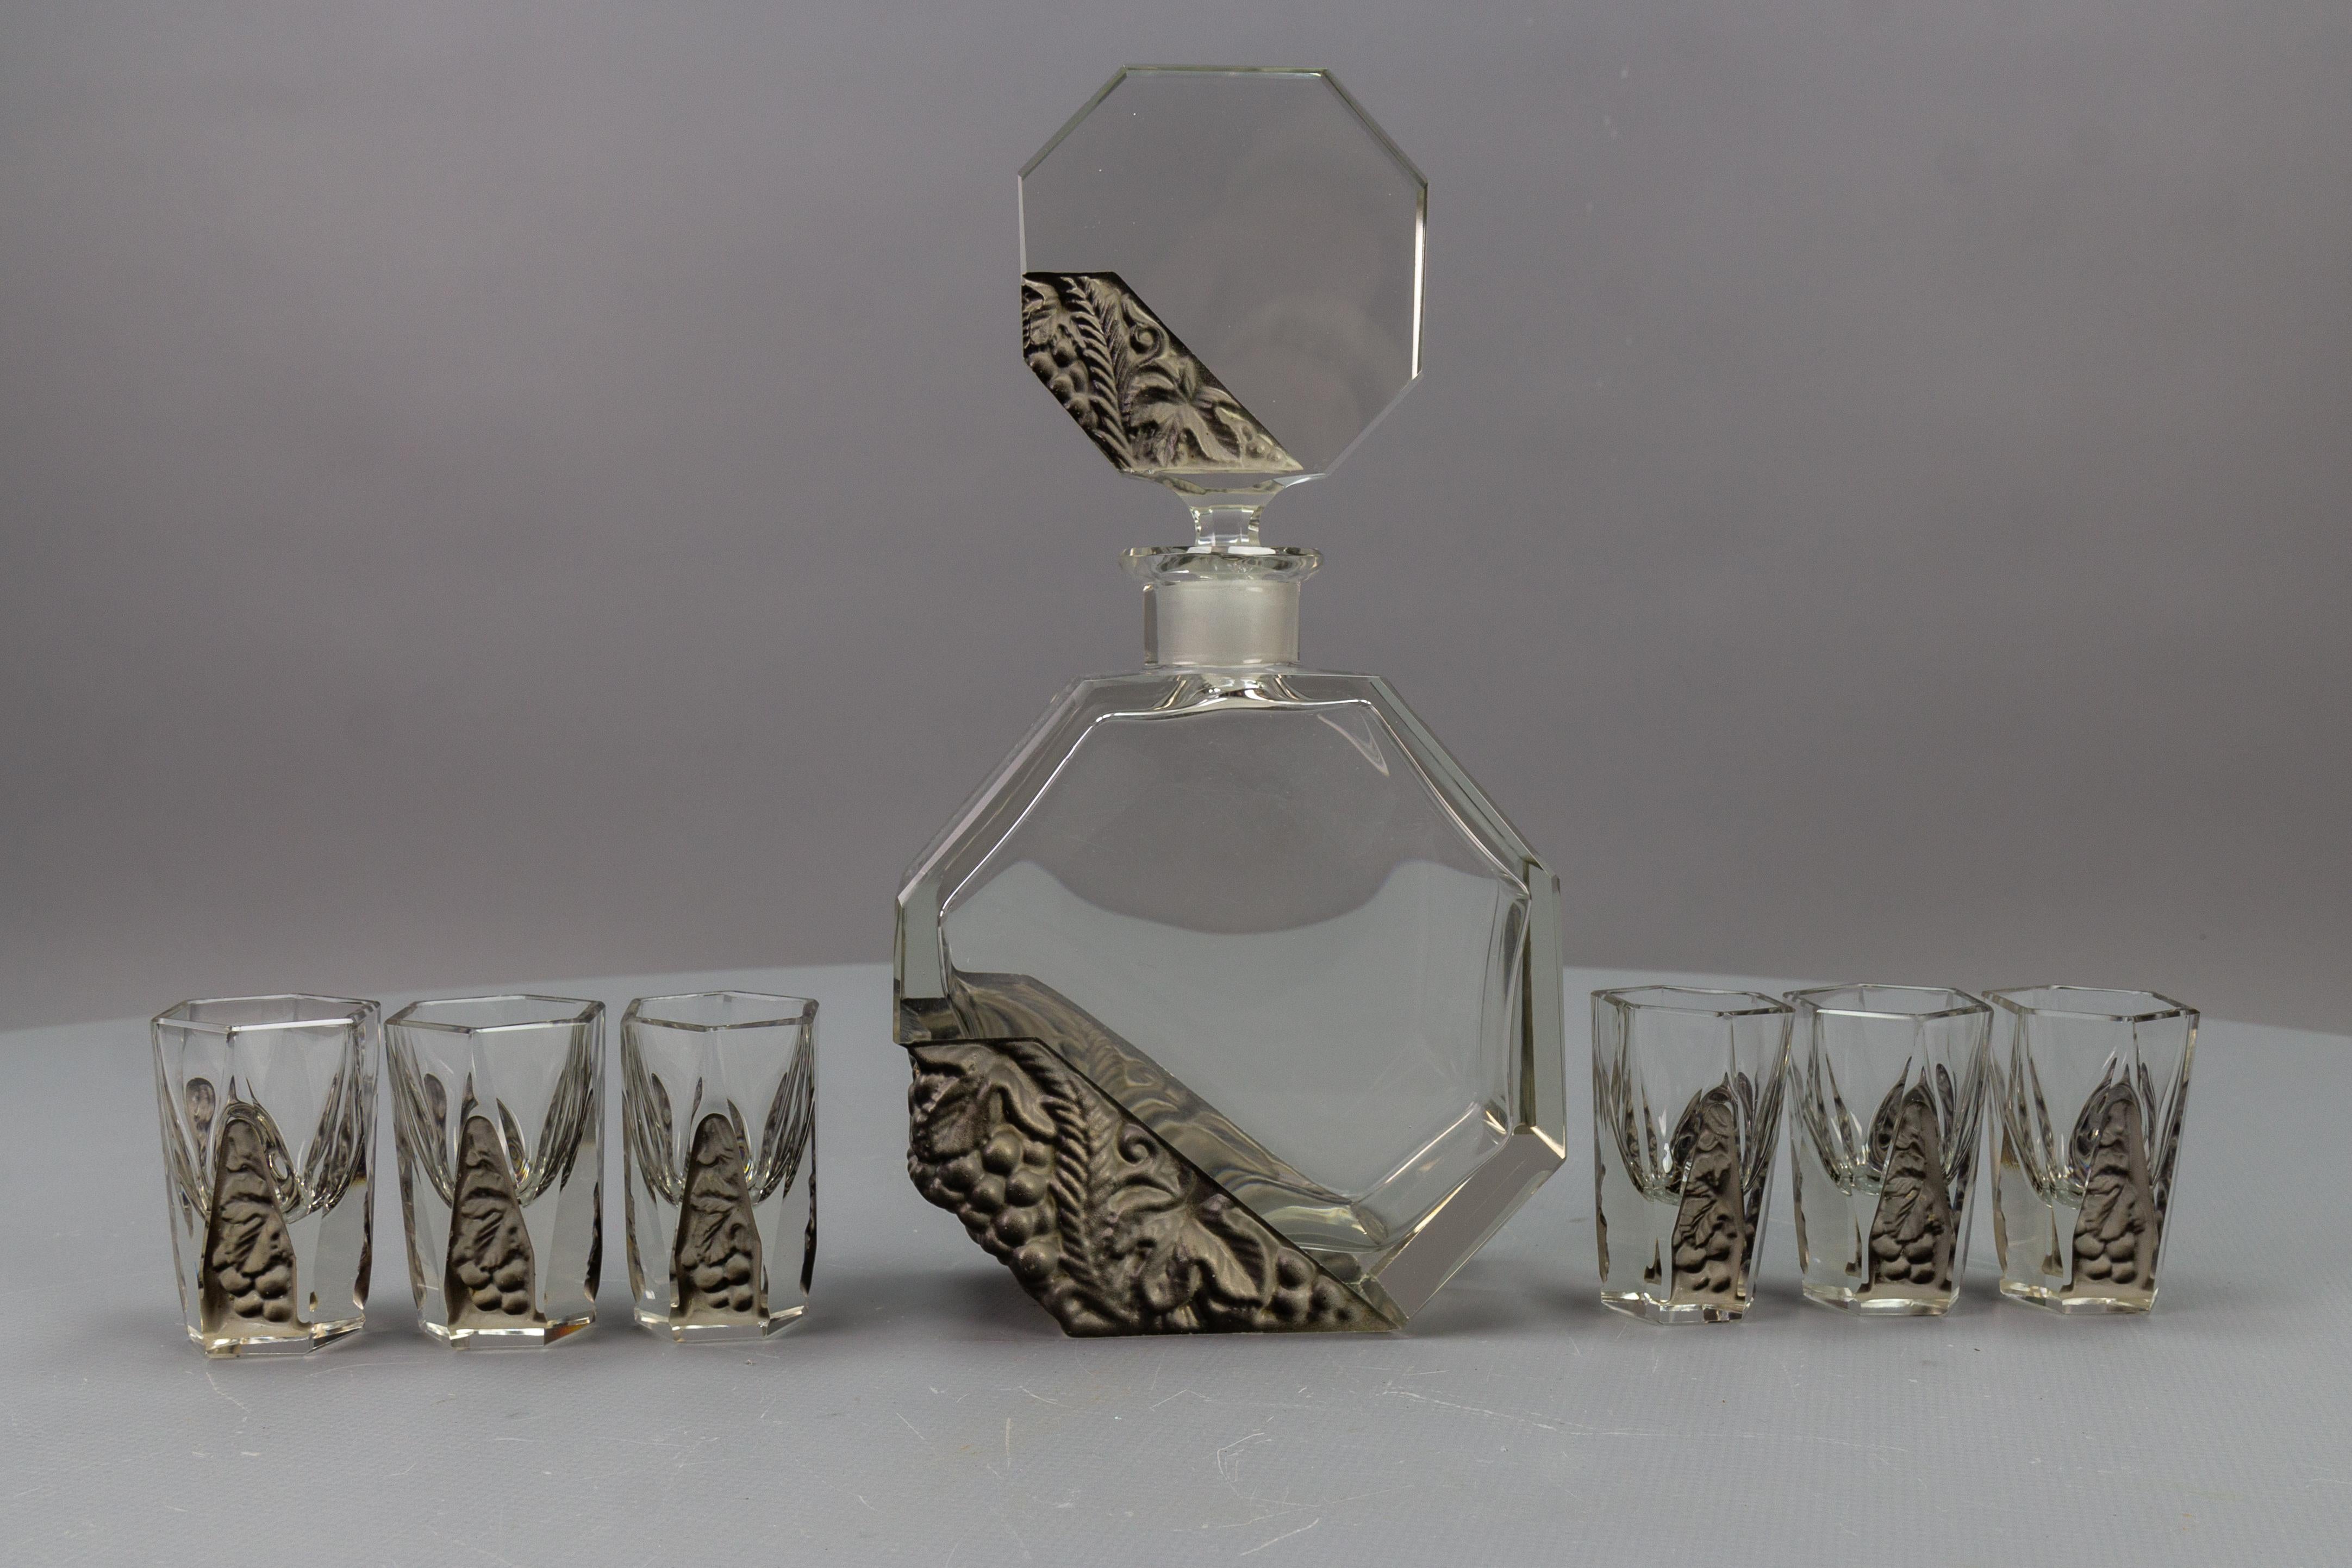 Art Deco Czech Bohemian clear and grey crystal glass decanter and six glasses set by Schlevogt & Hoffman.
This fabulous and collectible Curt Schlevogt & Heinrich Hoffmann classic Art Deco set of a decanter with its impressive stopper and six glasses